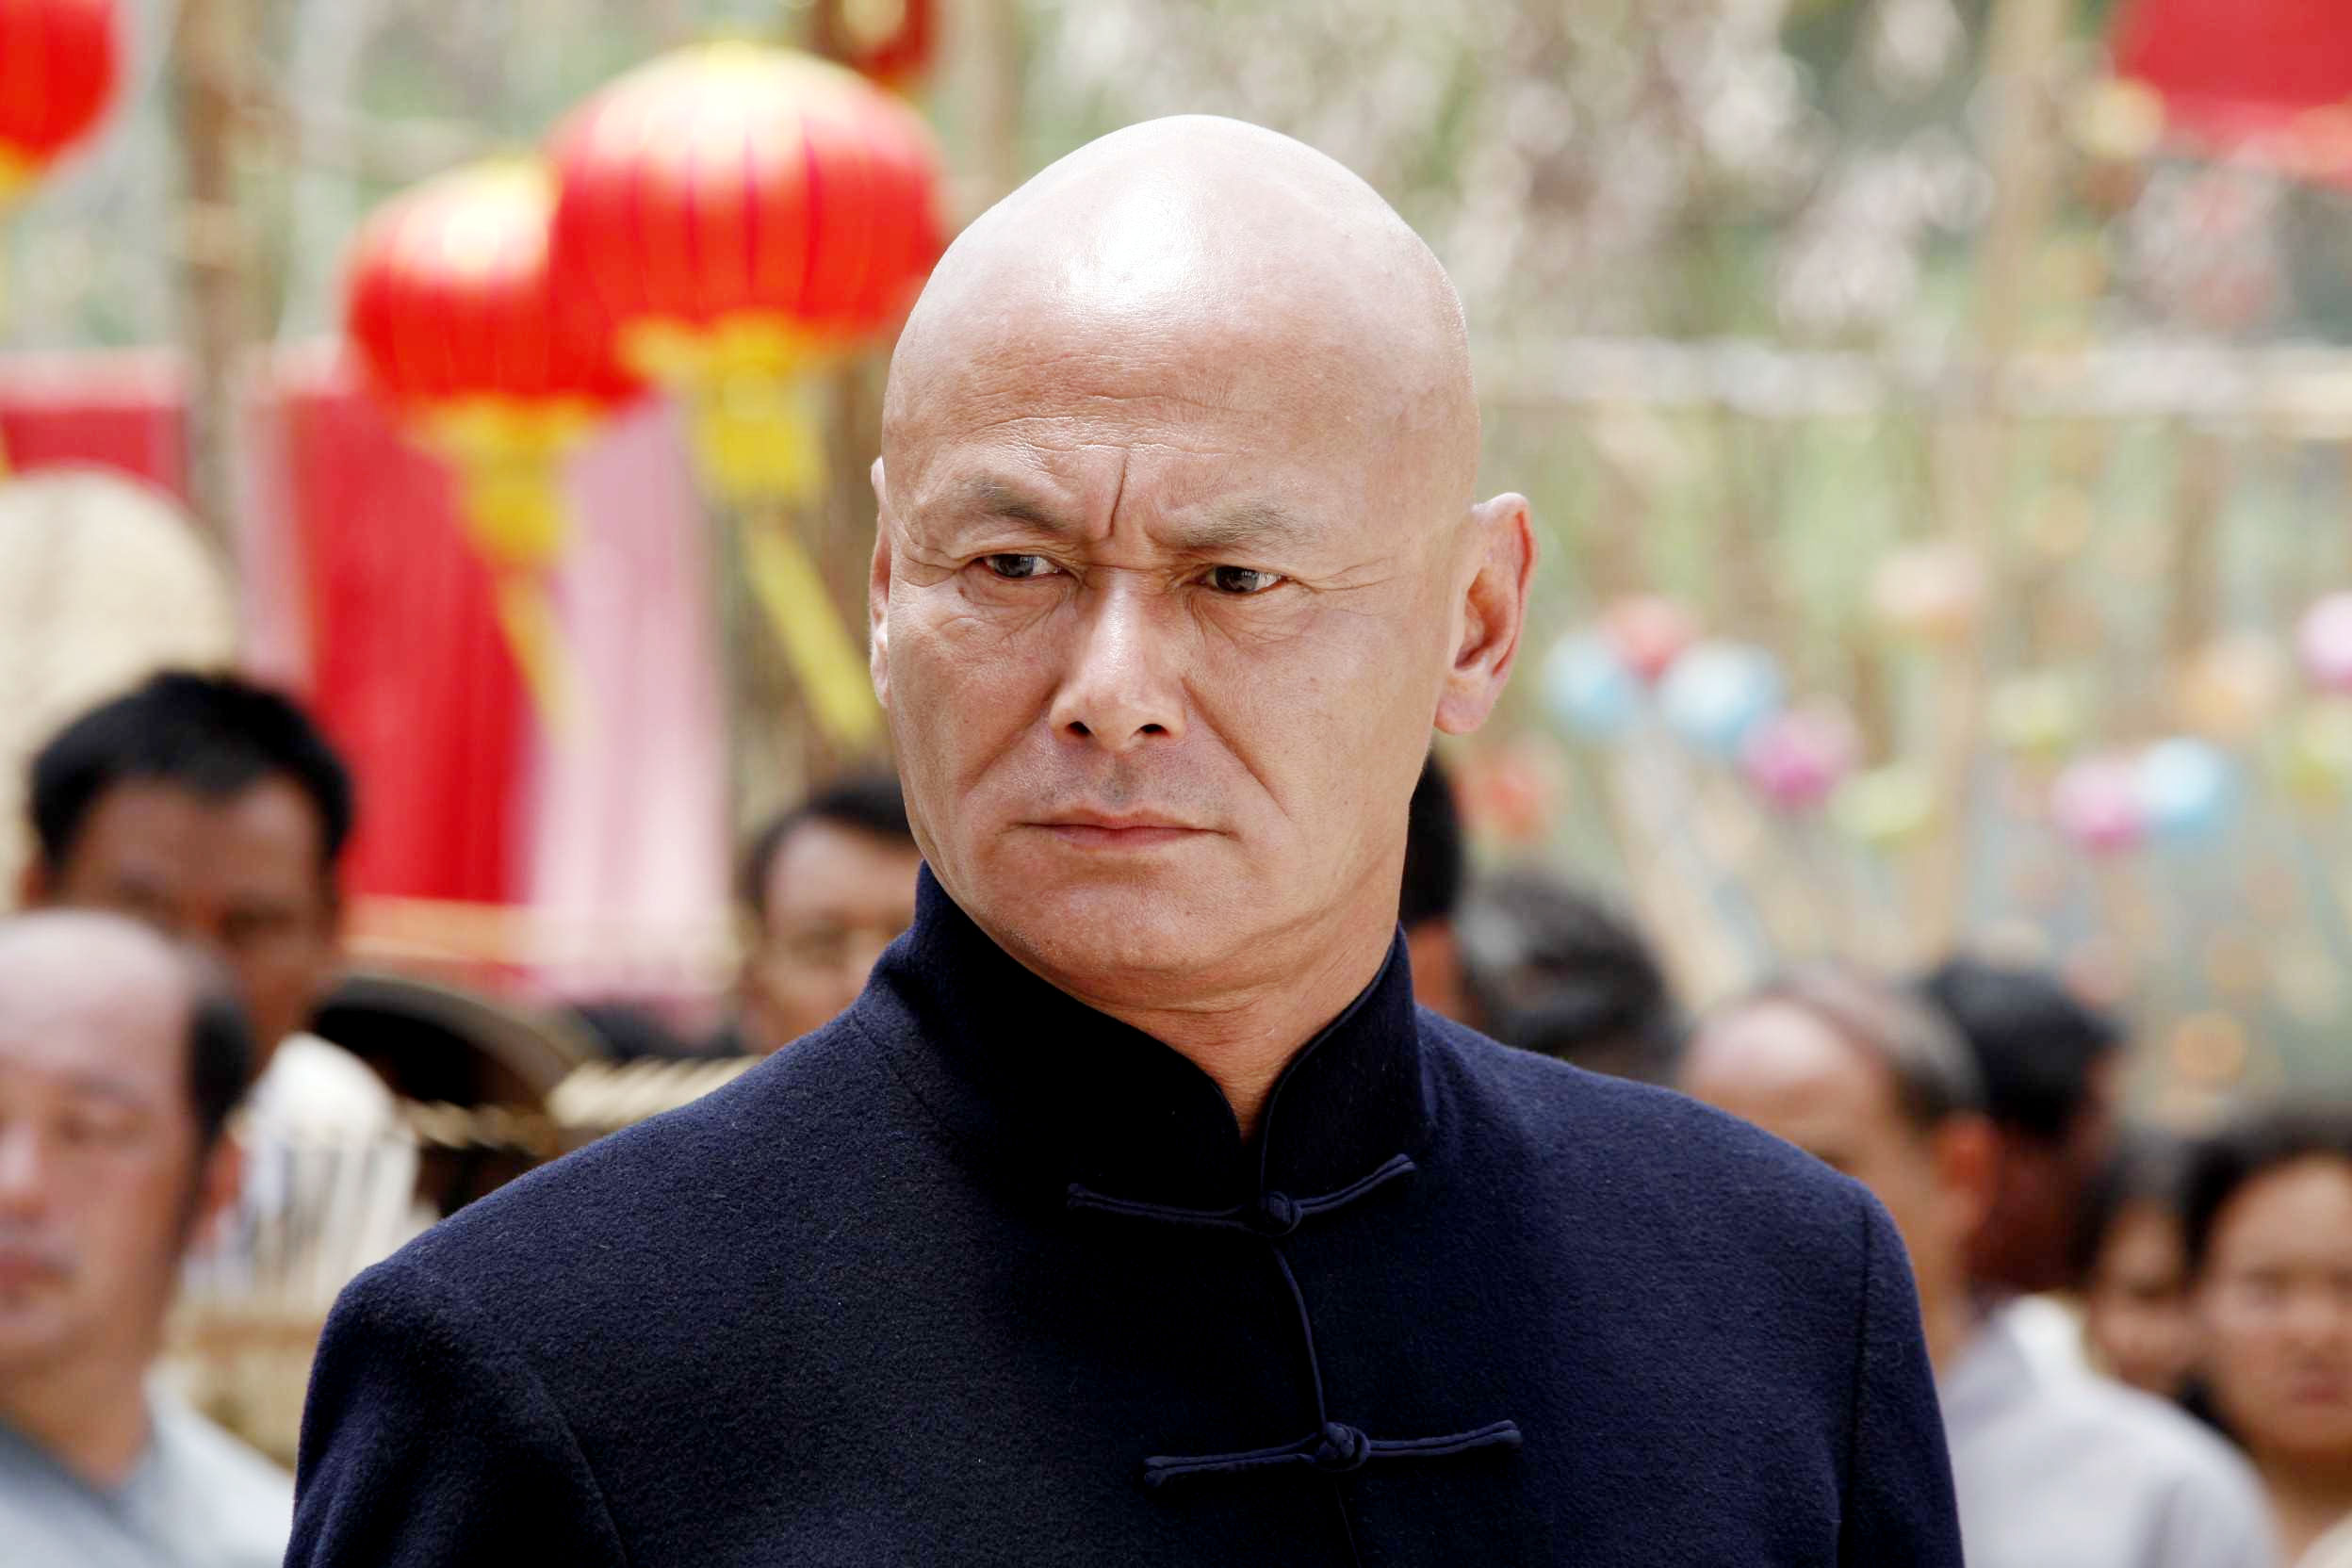 Gordon Liu stars as Hojo in Warner Bros. Pictures' Chandni Chowk to China (2009). Photo credit by Sheena Sippy.